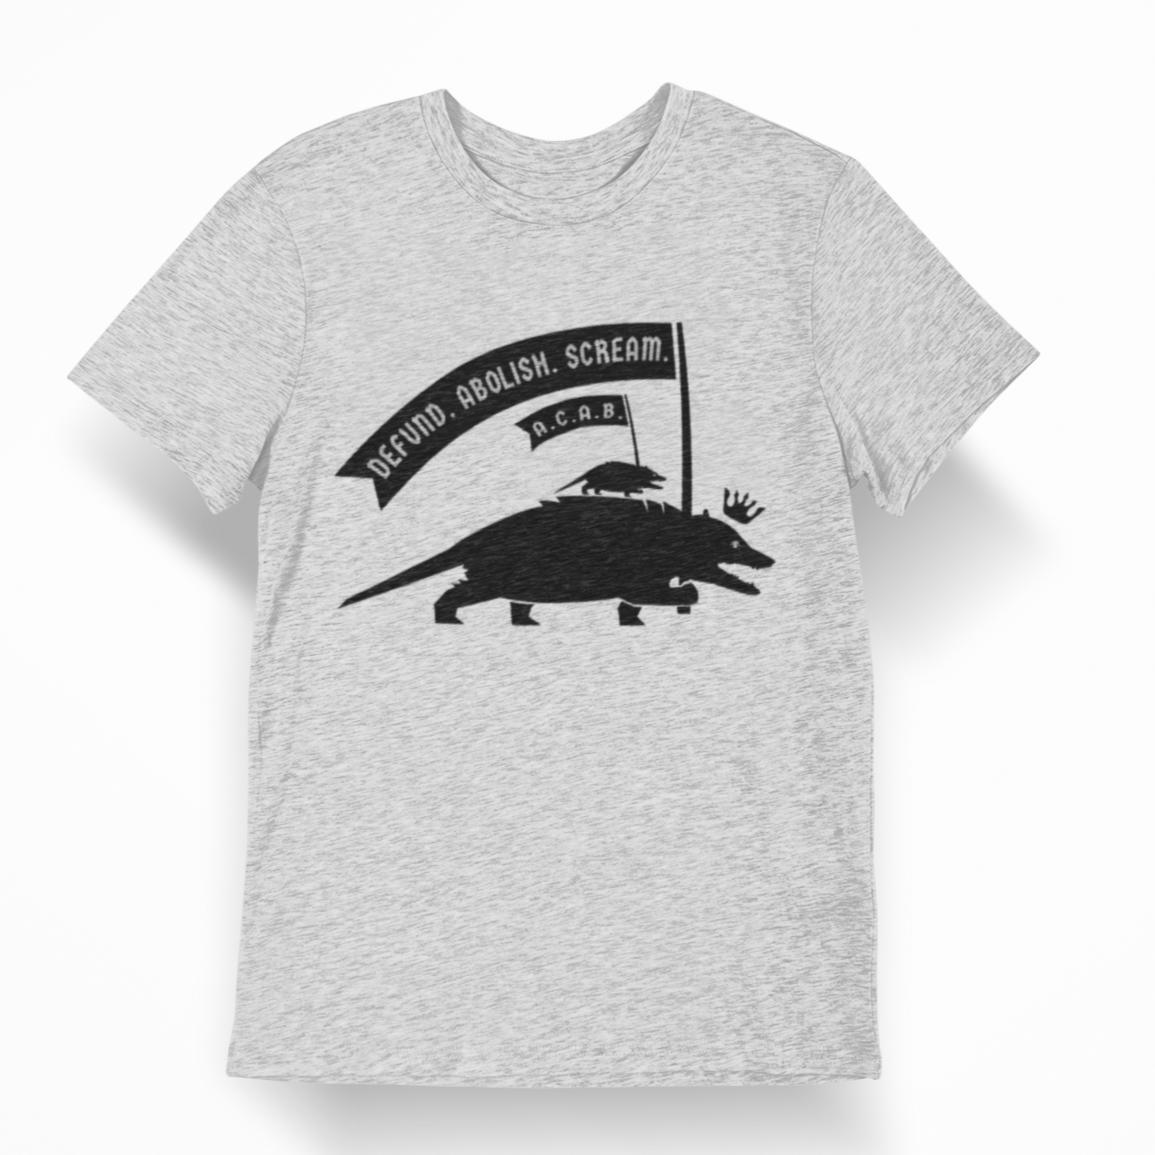 Heathered grey unisex teeshirt with a black emblem of a possum carrying a flag reading "Defund. Abolish. Scream." and a baby possum on its back also carrying a flag reading "A.C.A.B."